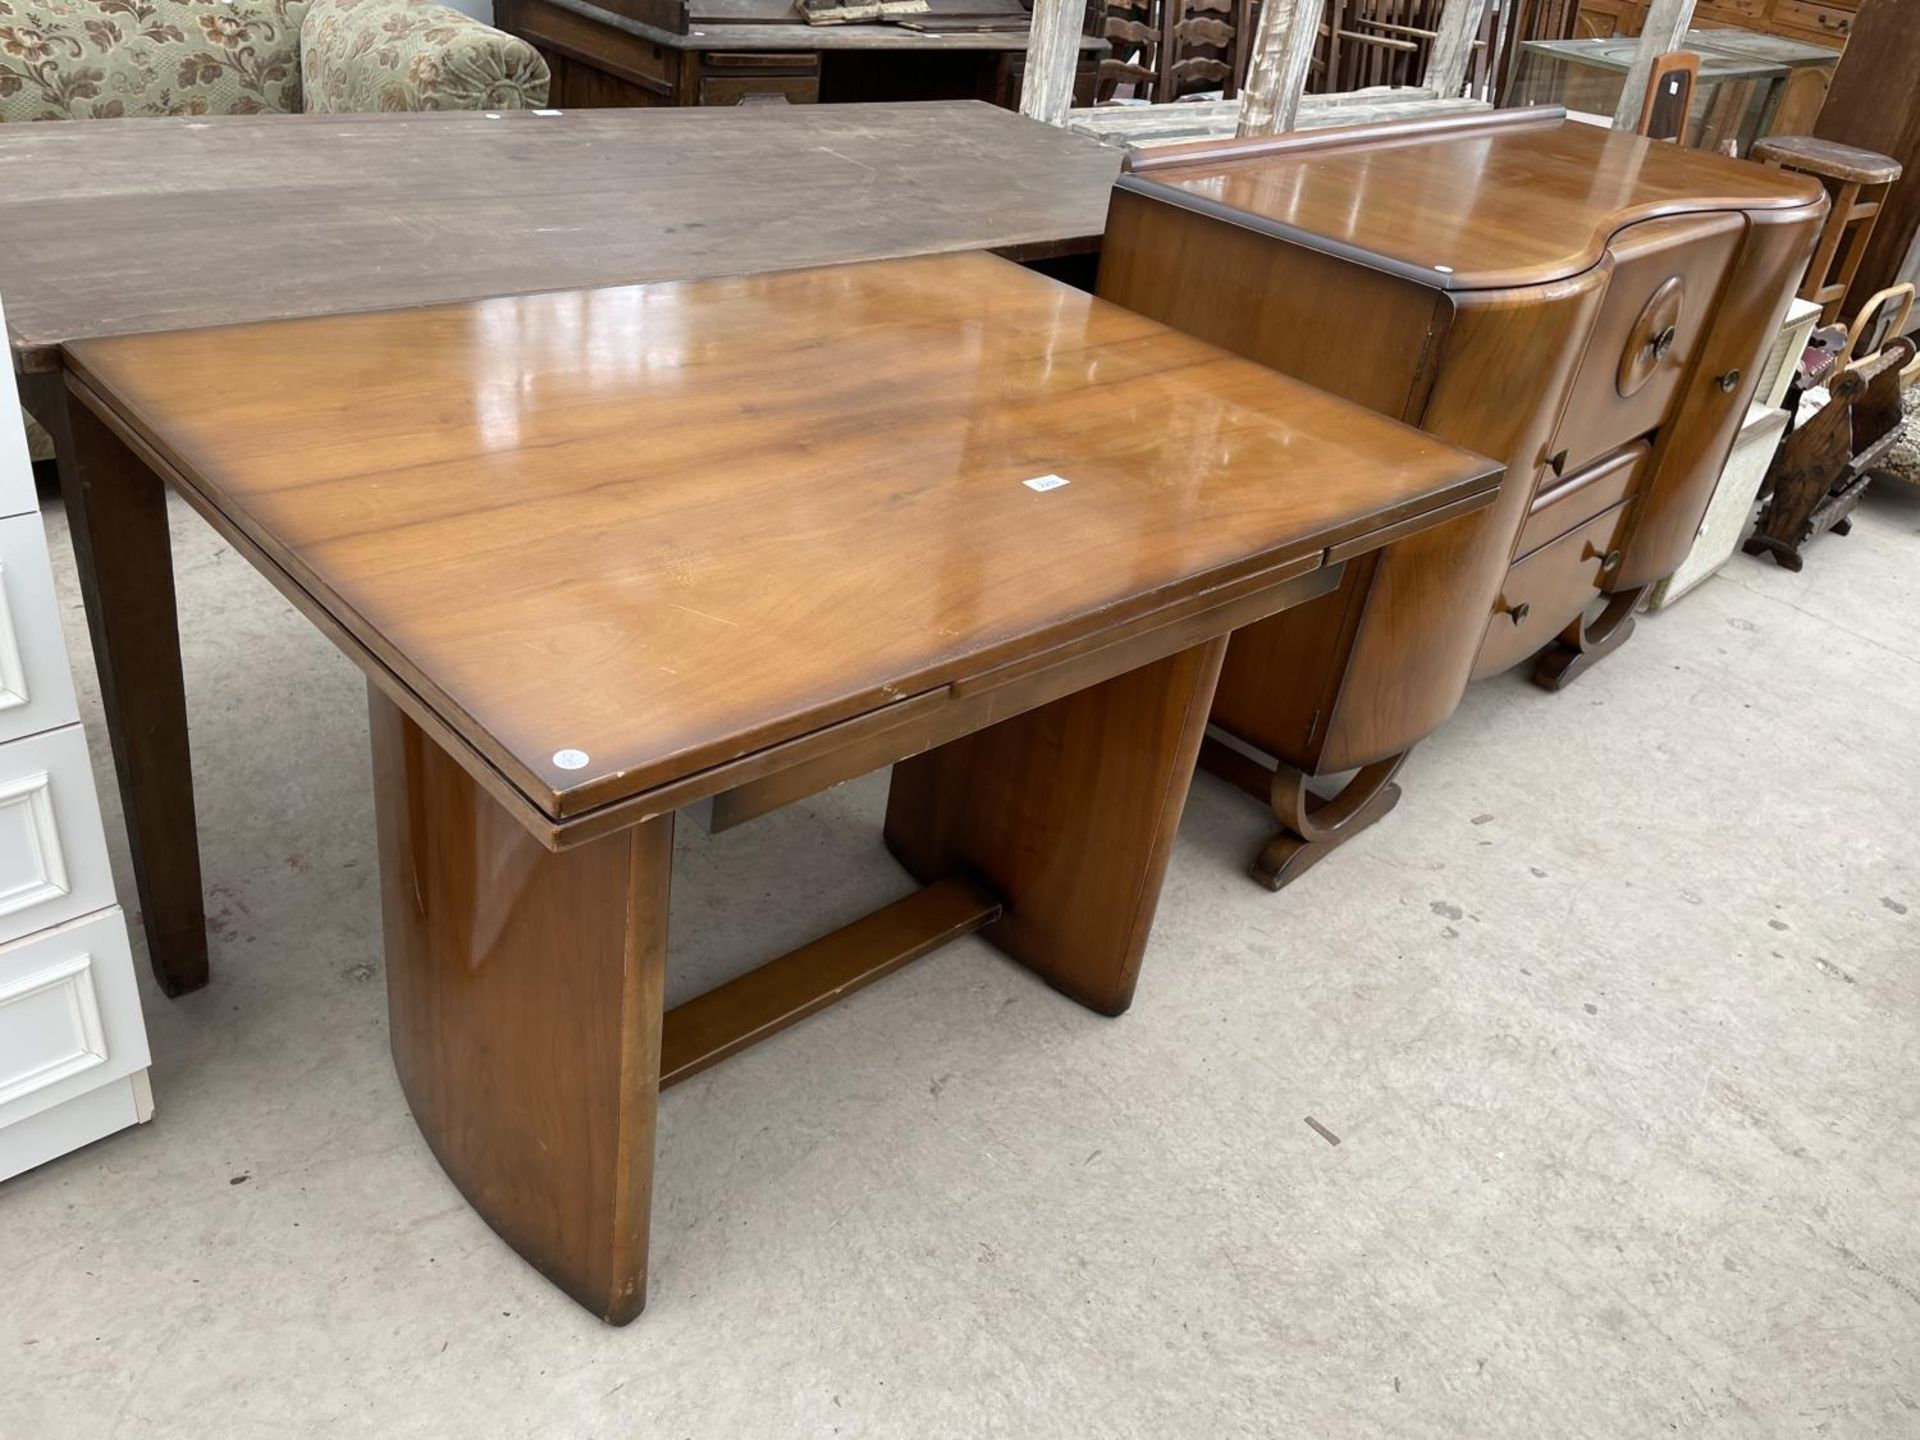 A MID 20TH CENTURY SHINY WALNUT SIDEBOARD AND MATCHING DRAW-LEAF DINING TABLE